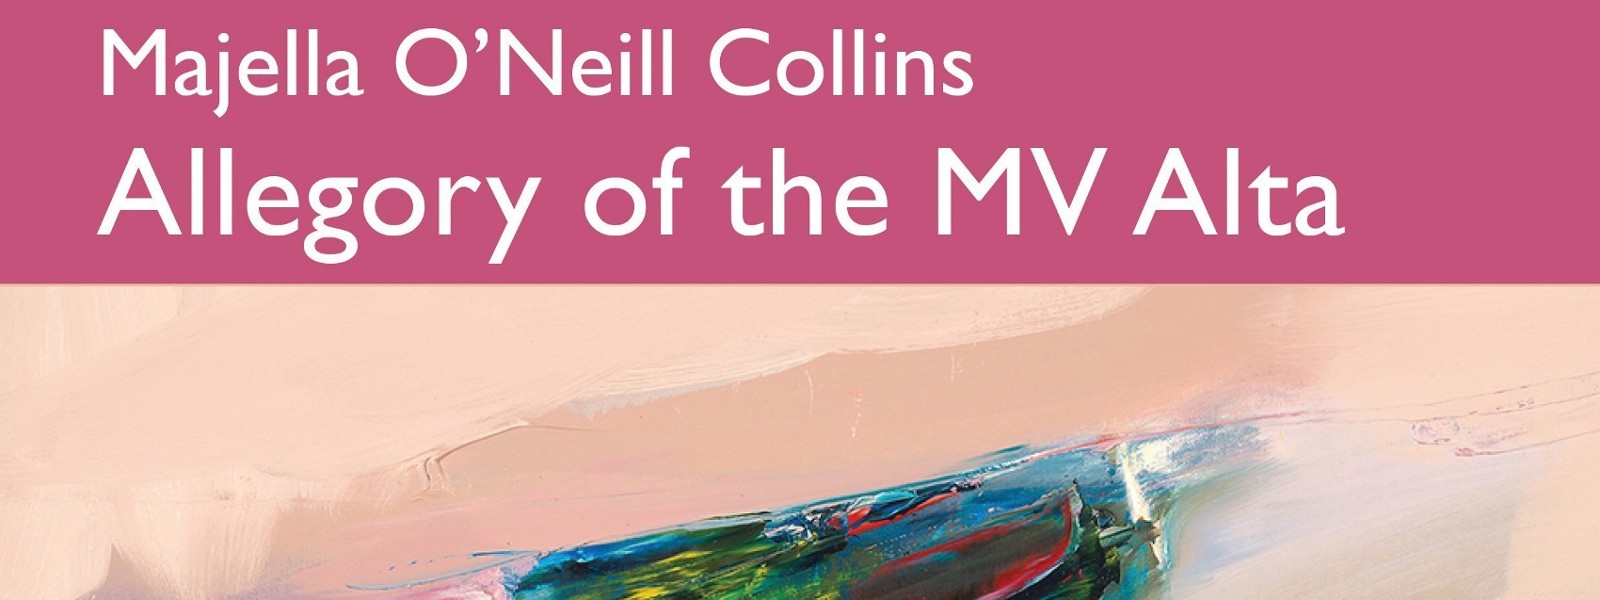 Allegory of the MV Alta an exhibition by Majella O'Neill Collins